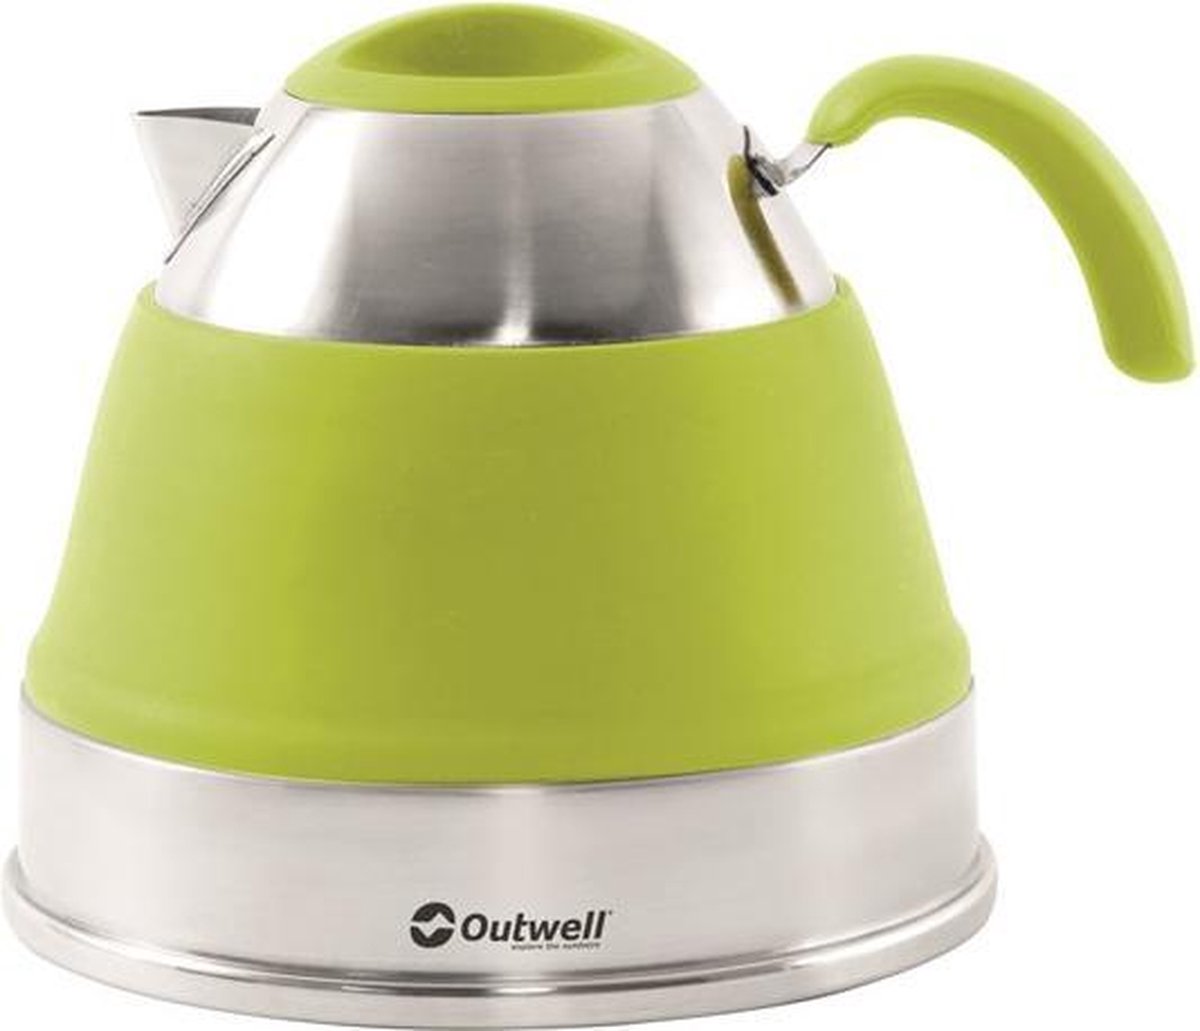 Outwell Collaps Kettle Green